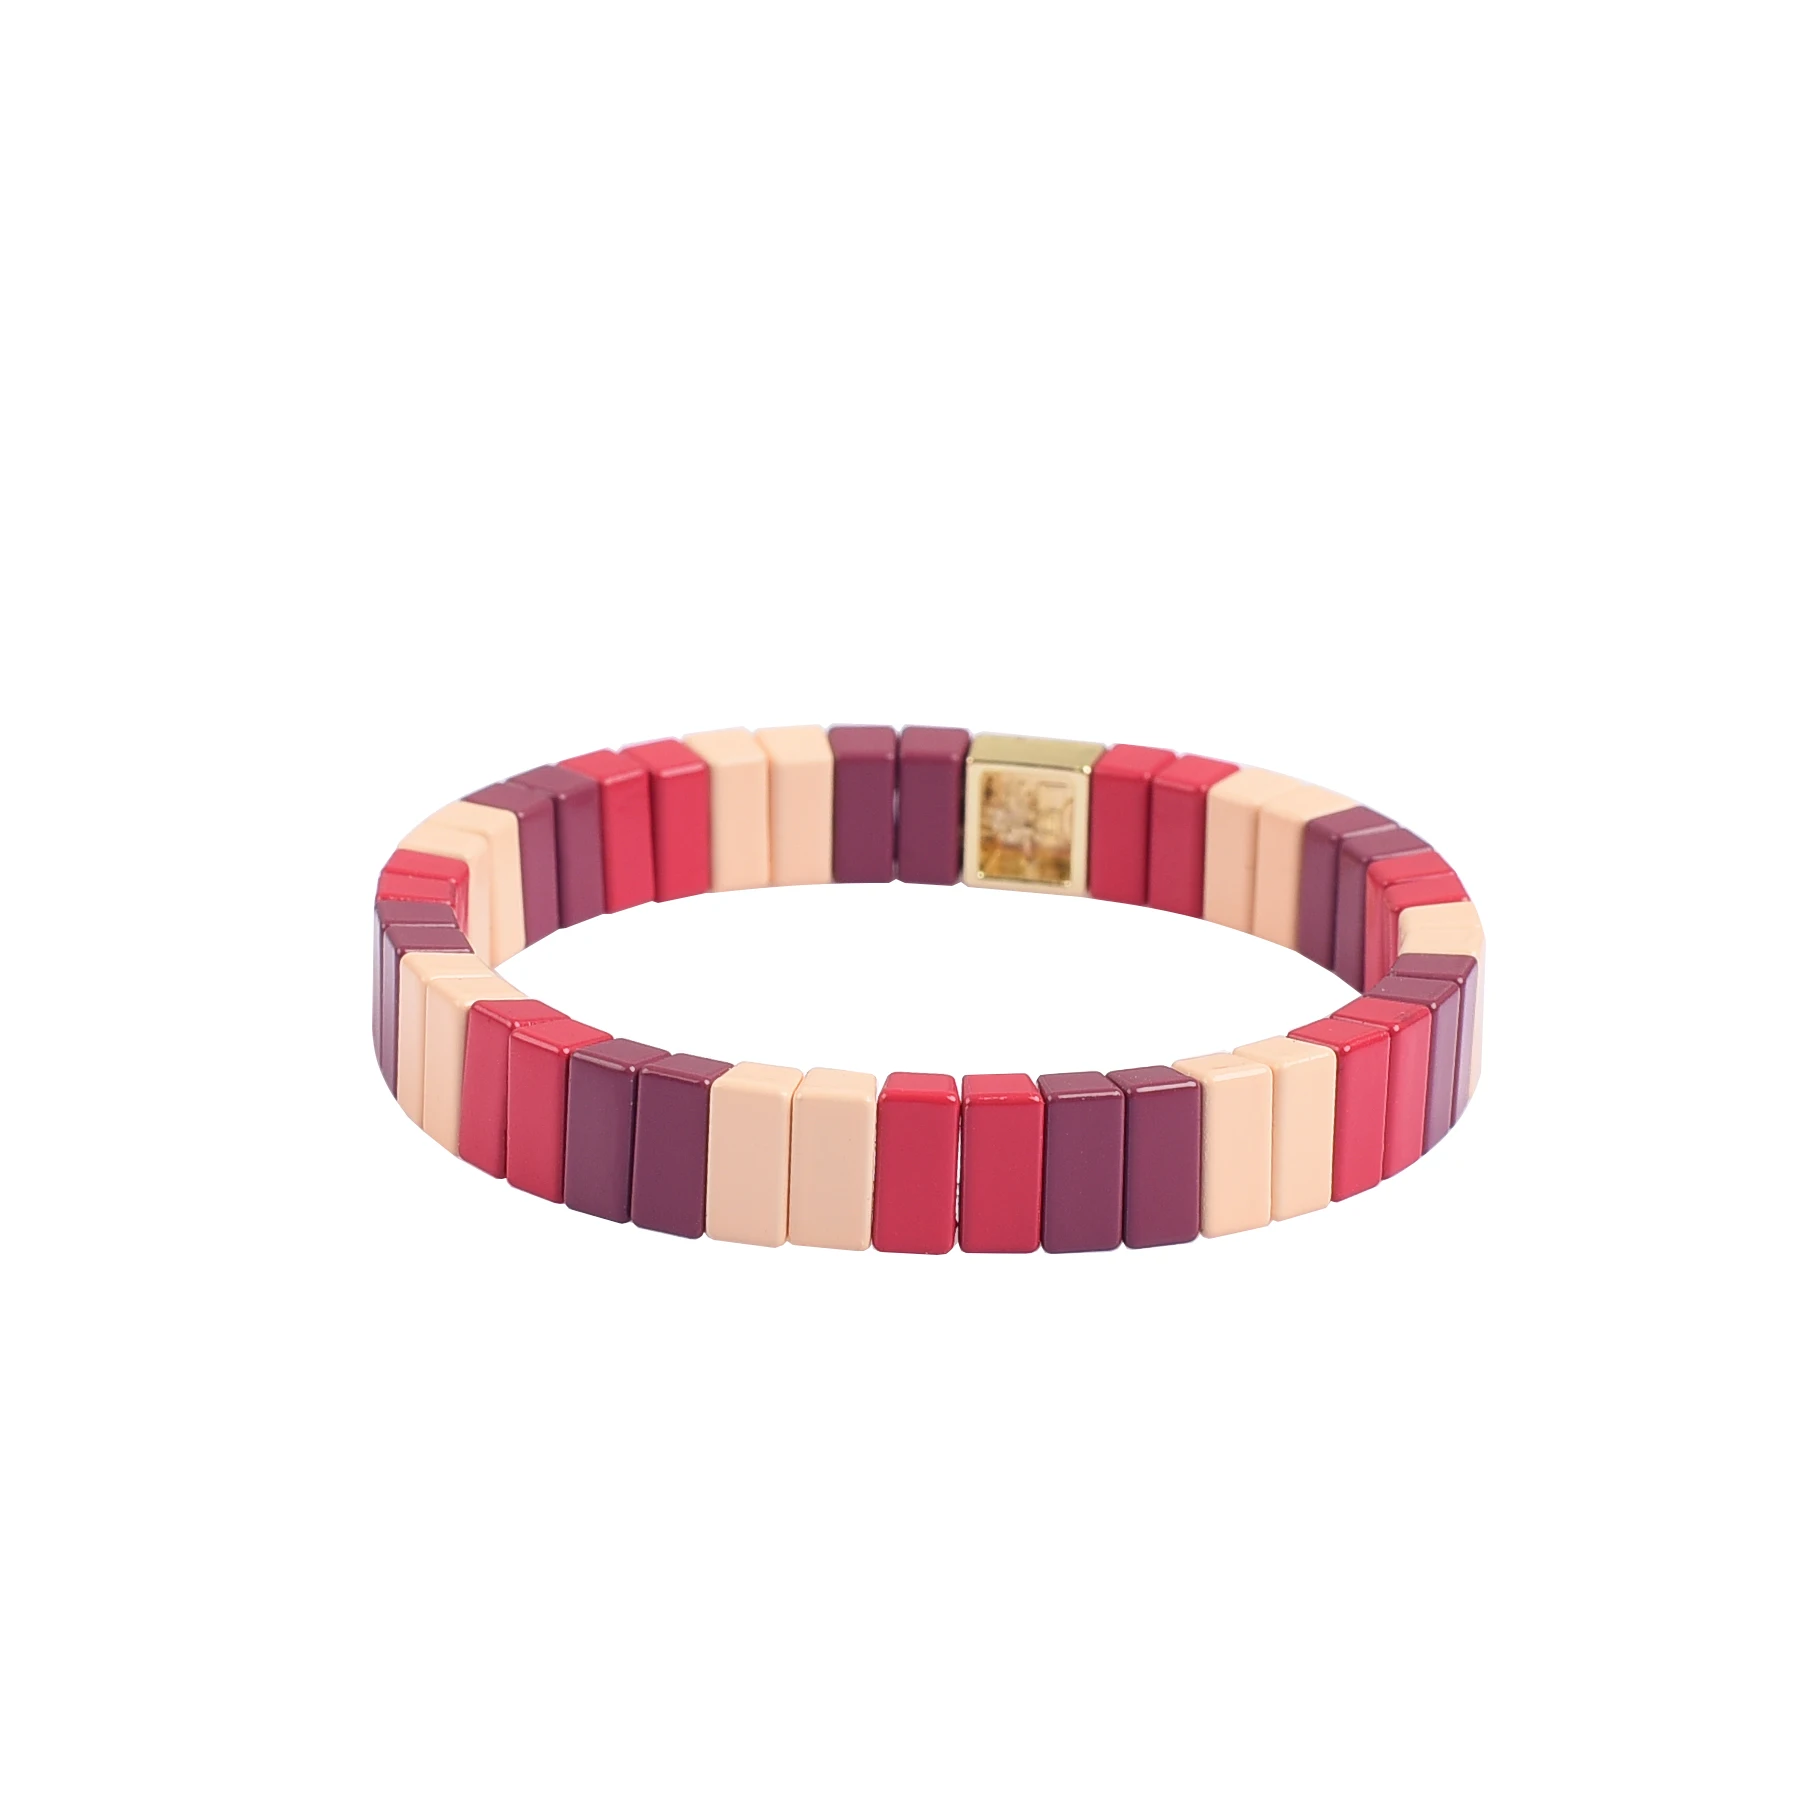 

Stackable Tile Enamel Beads Bracelet Colorblock Metal Rectangle Beaded Wristband Friendship Jewelry Bangle for Women Gifts